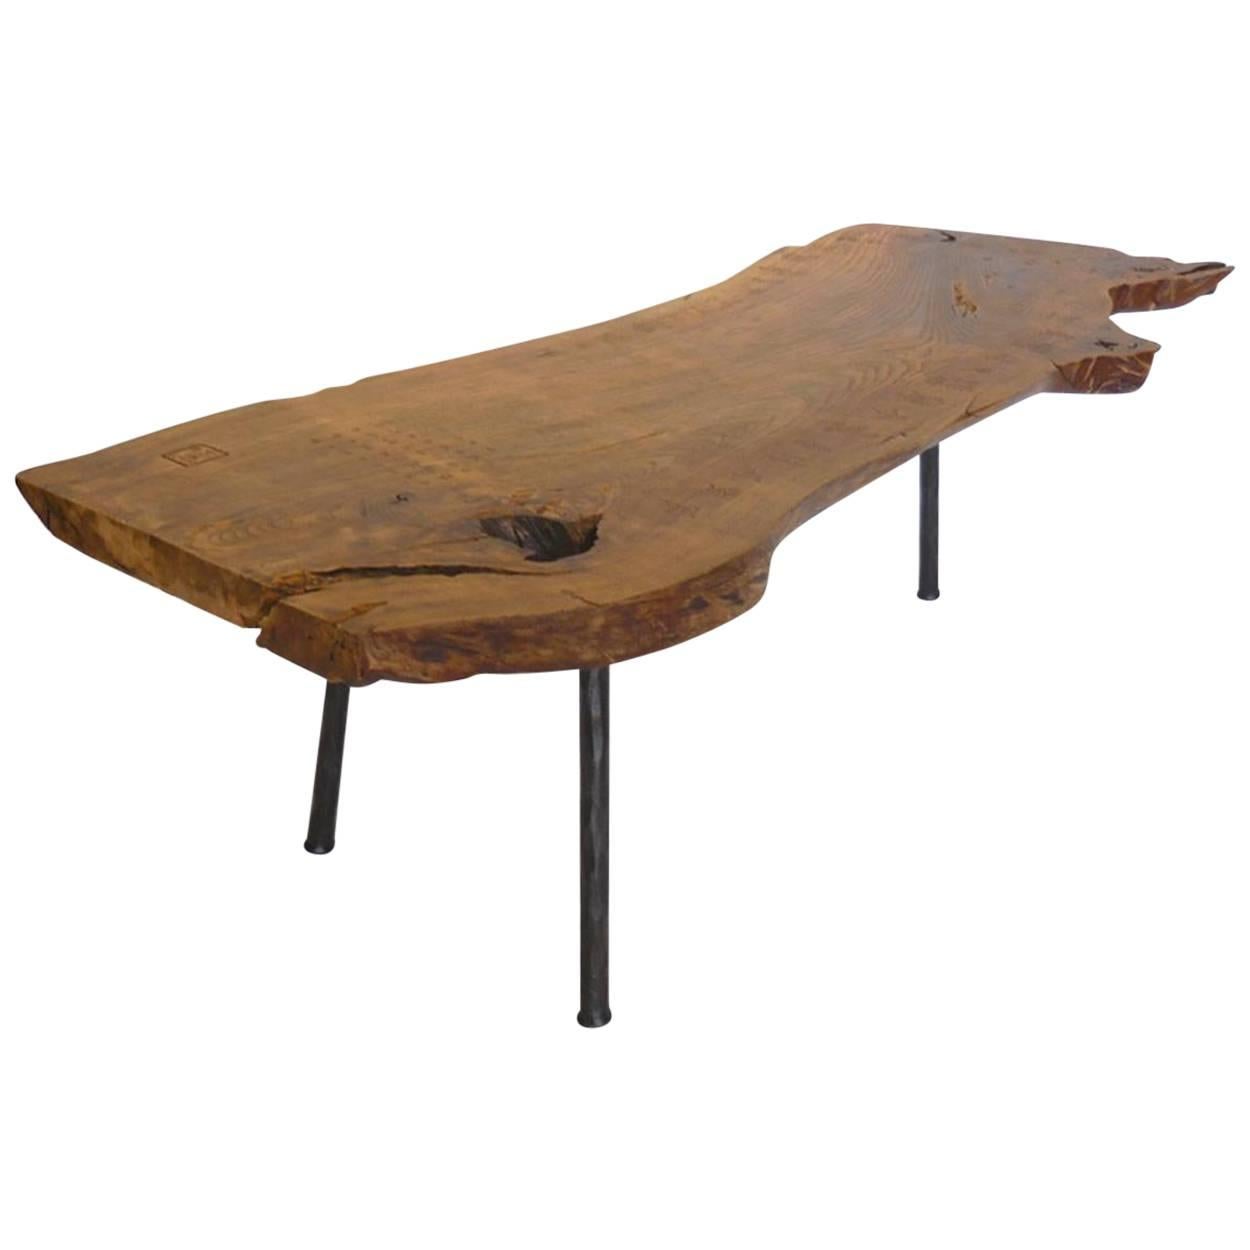 Live Edge Wood Slab Coffee Table or Bench with Three Legs